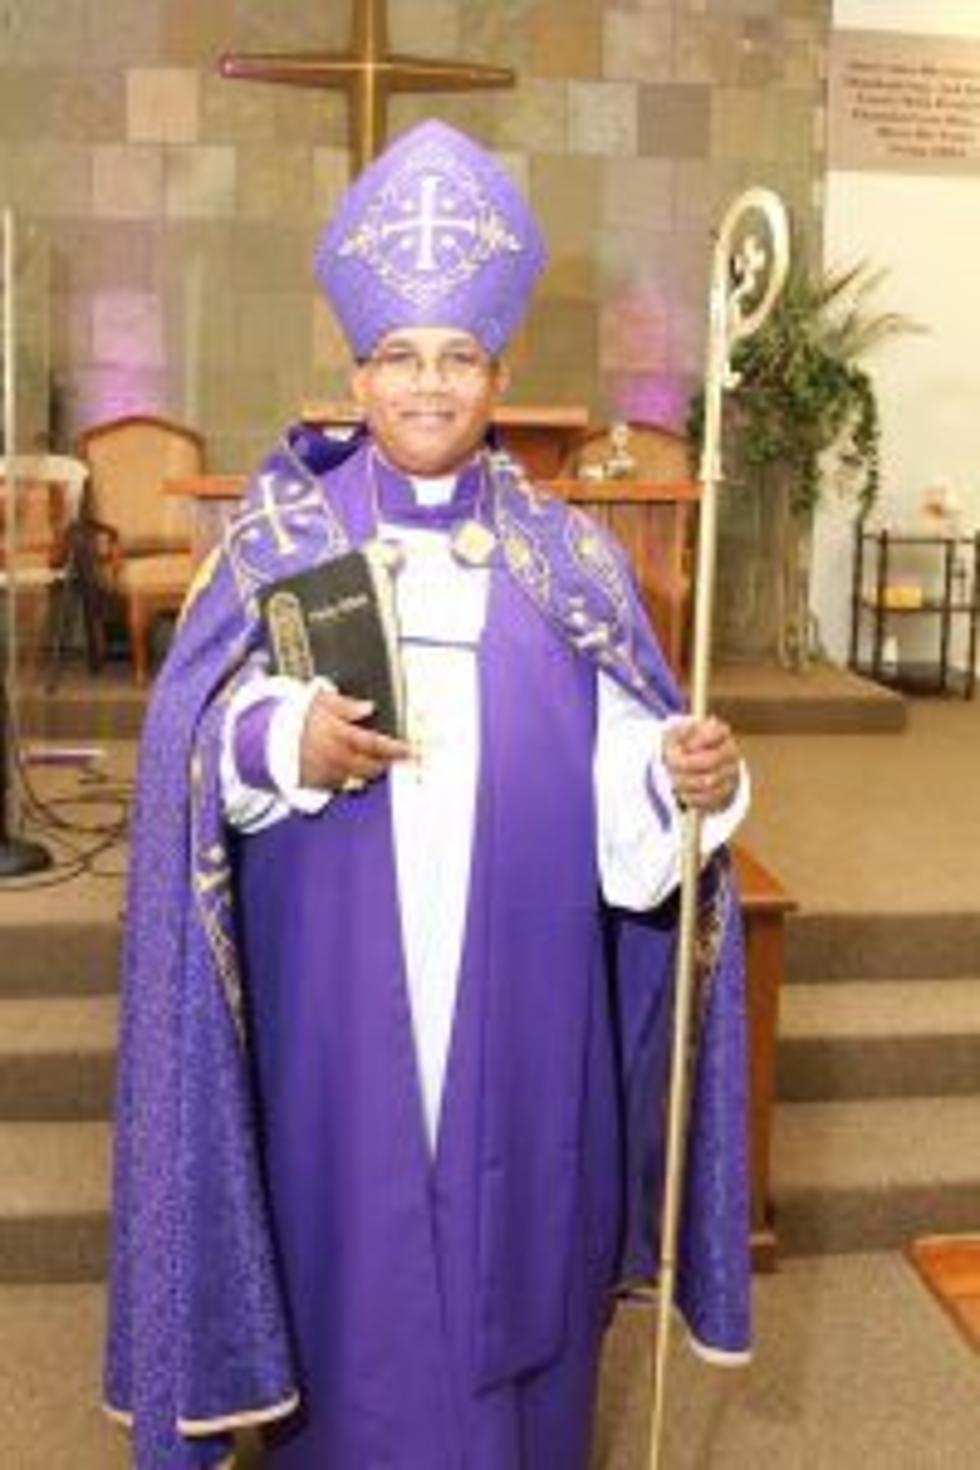 Spotlight House of Worship: Montclair has a new bishop in town